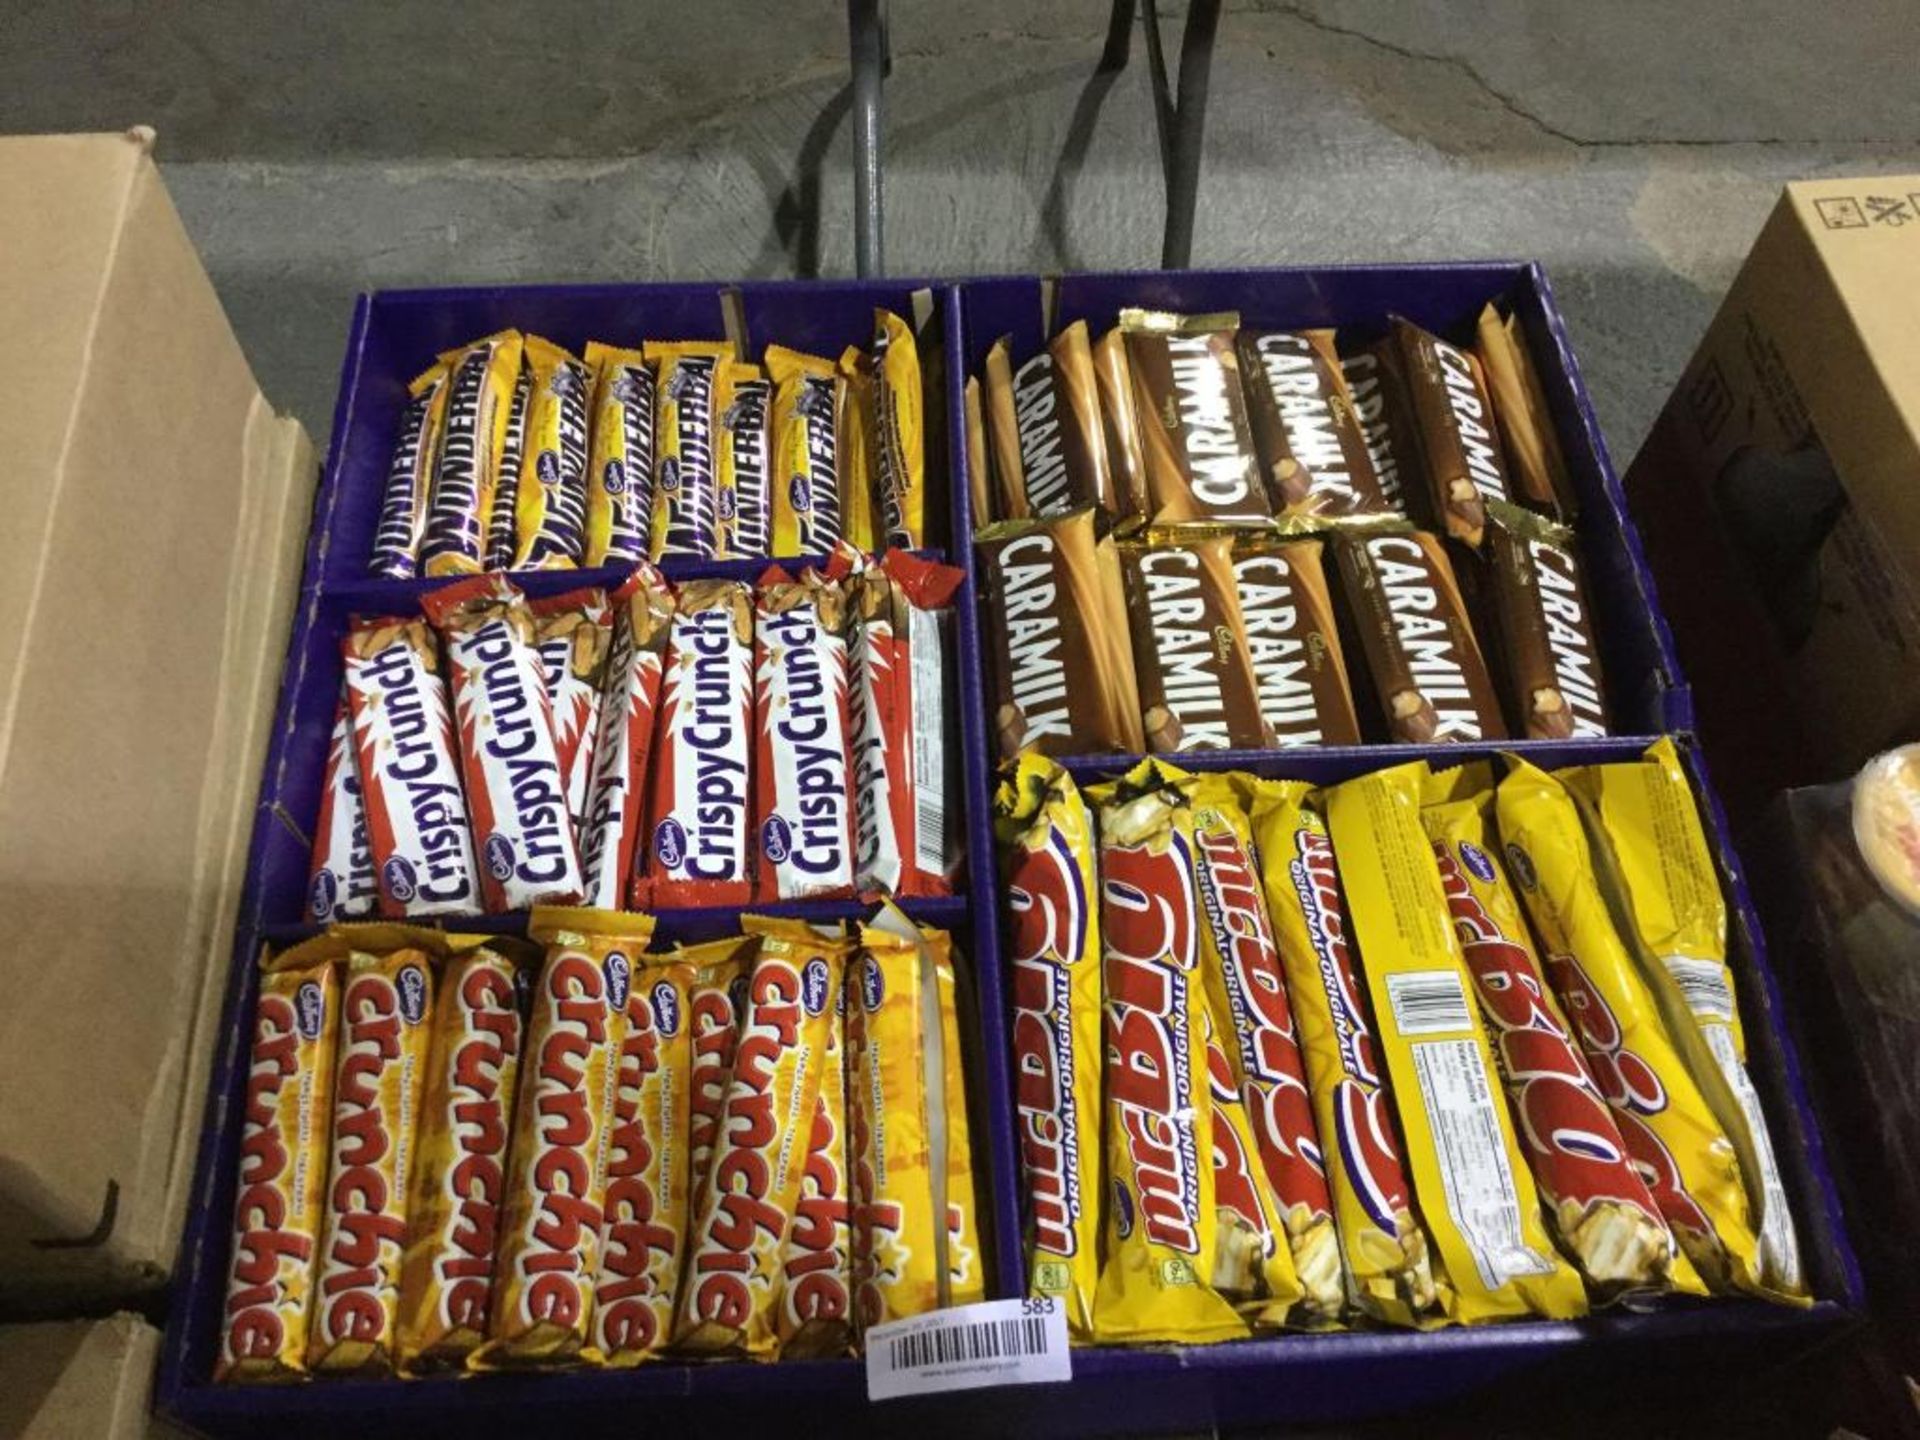 Giant Case of Chocolate Bars